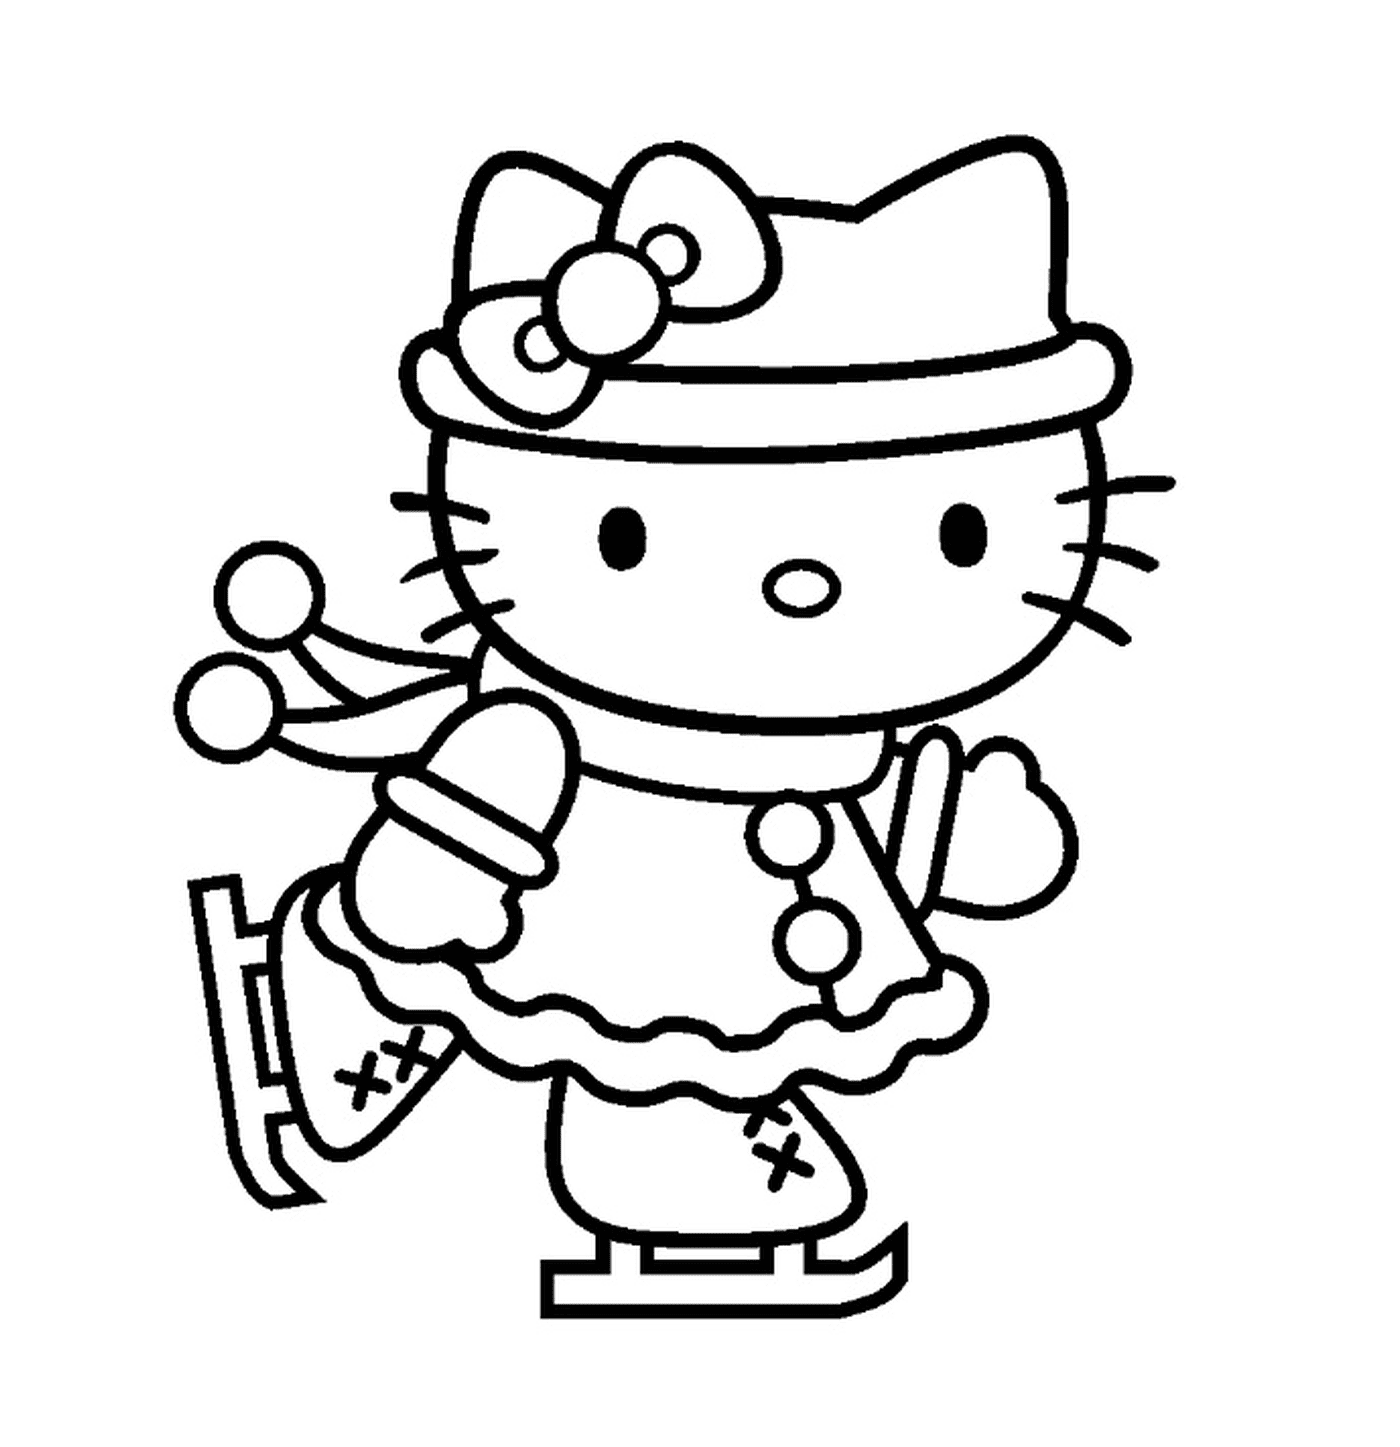  Hello Kitty with an ice skating outfit 